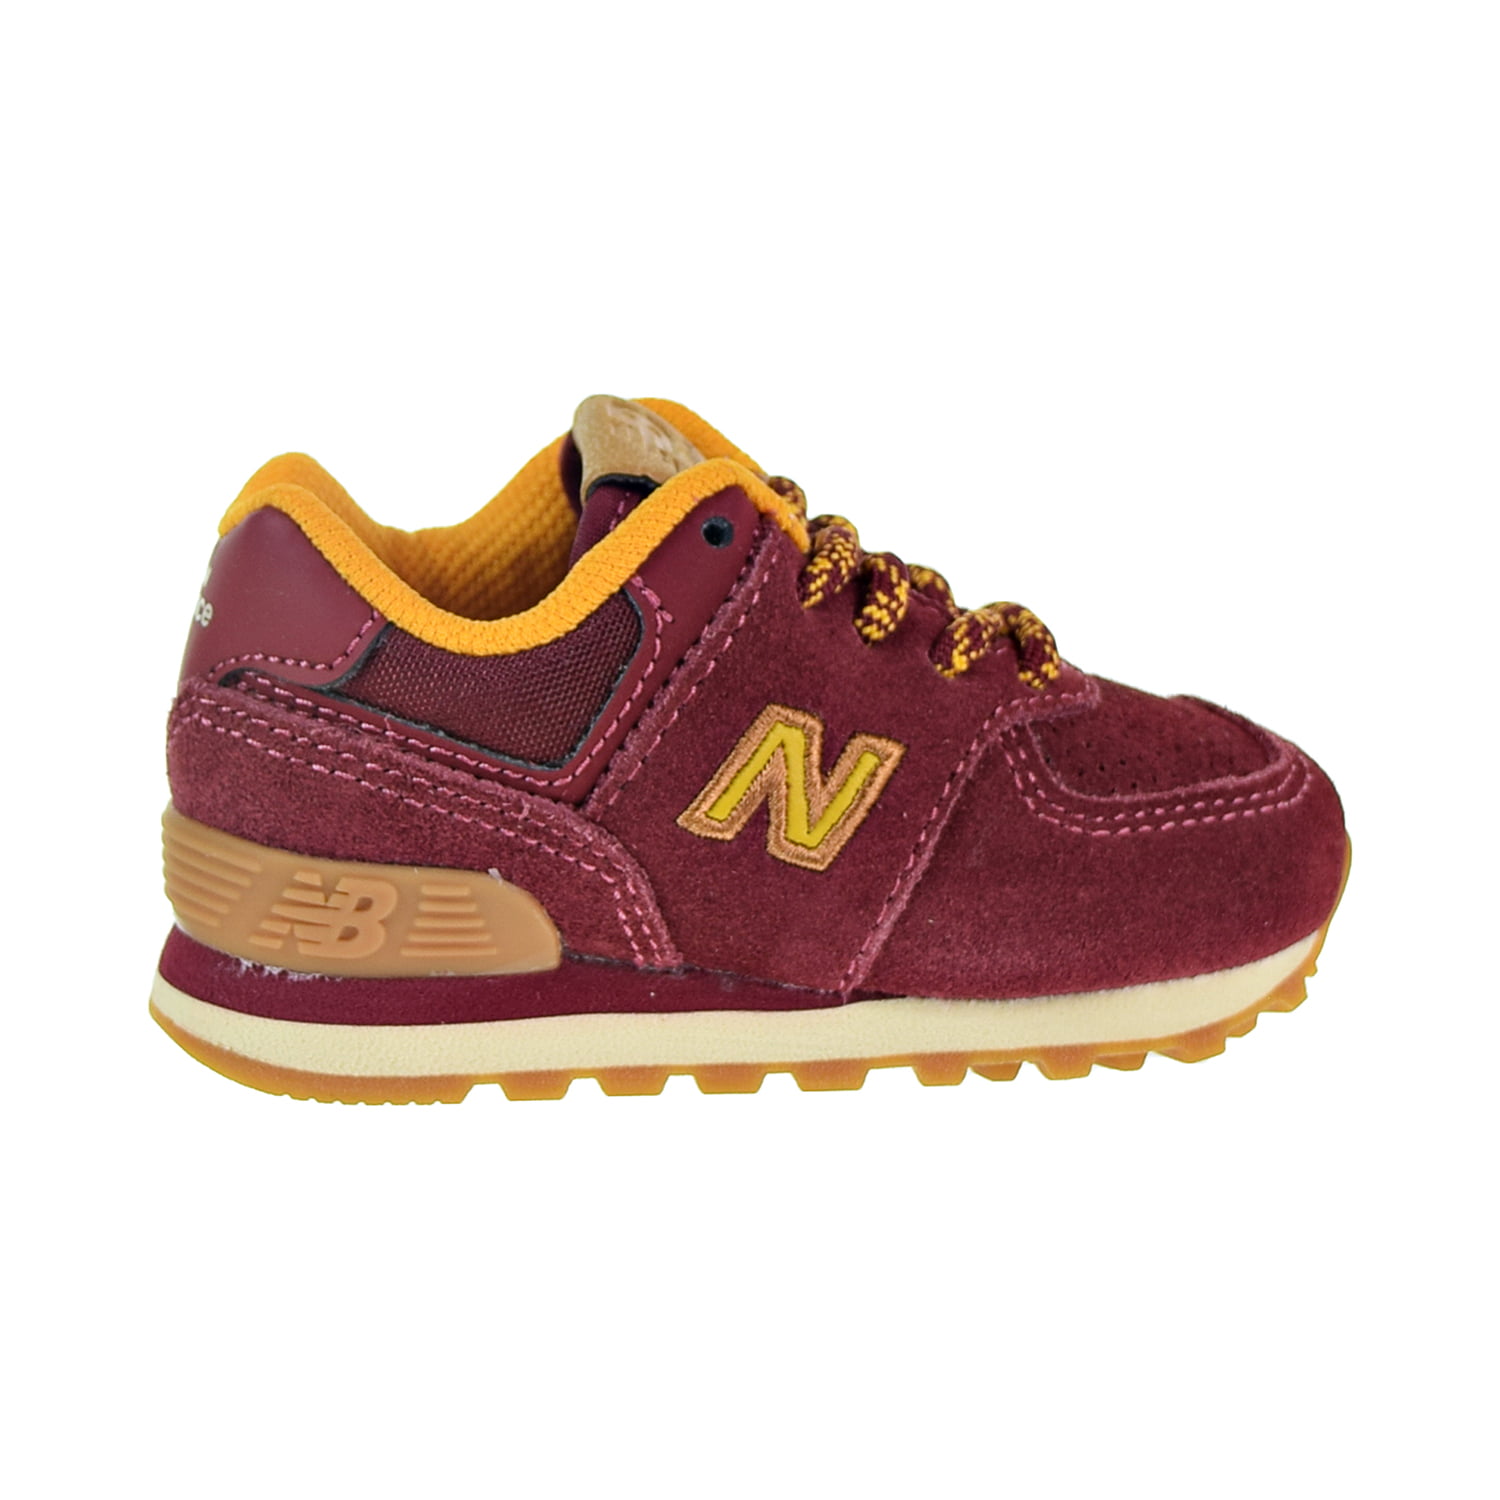 new balance 574 toddler shoes